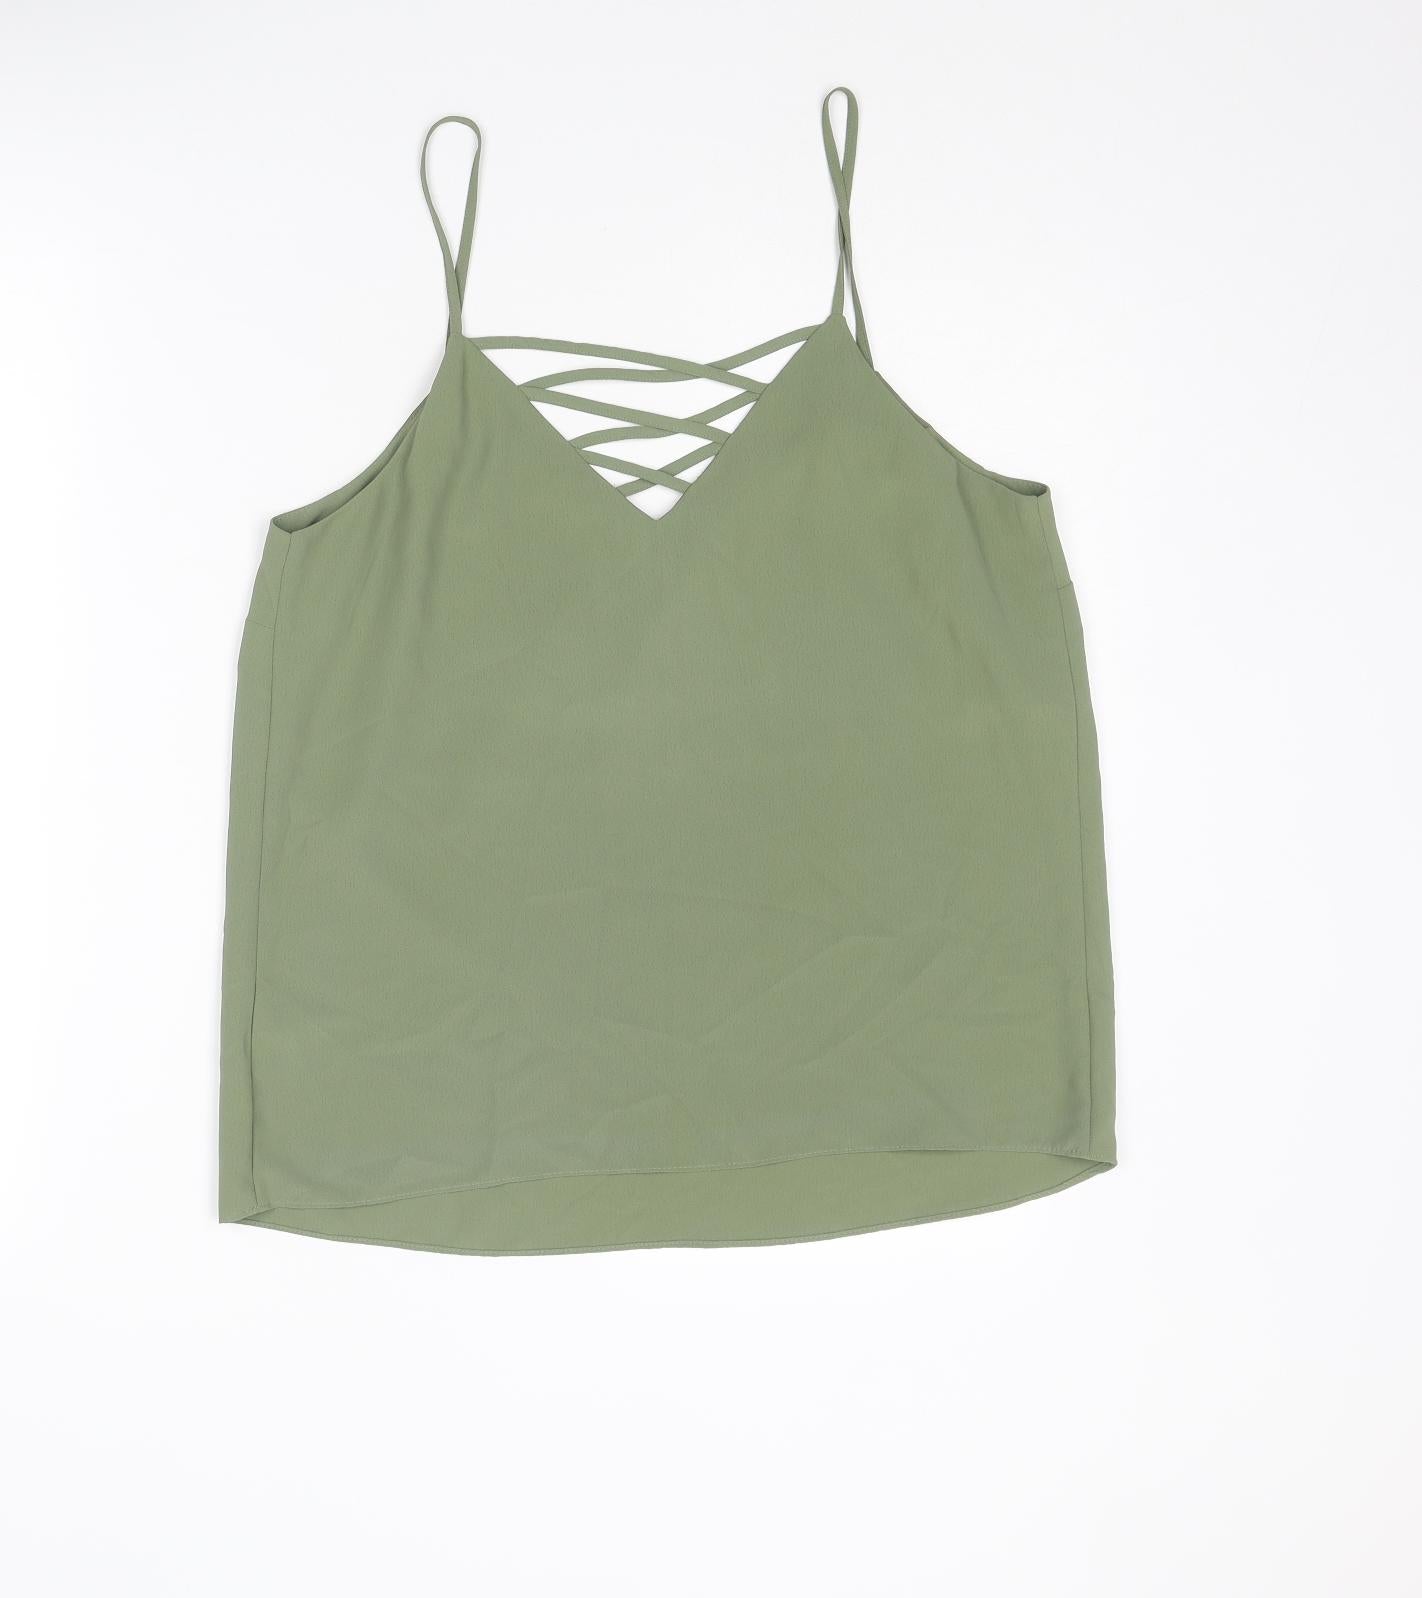 New Look Womens Green Polyester Basic Tank Size 12 V-Neck